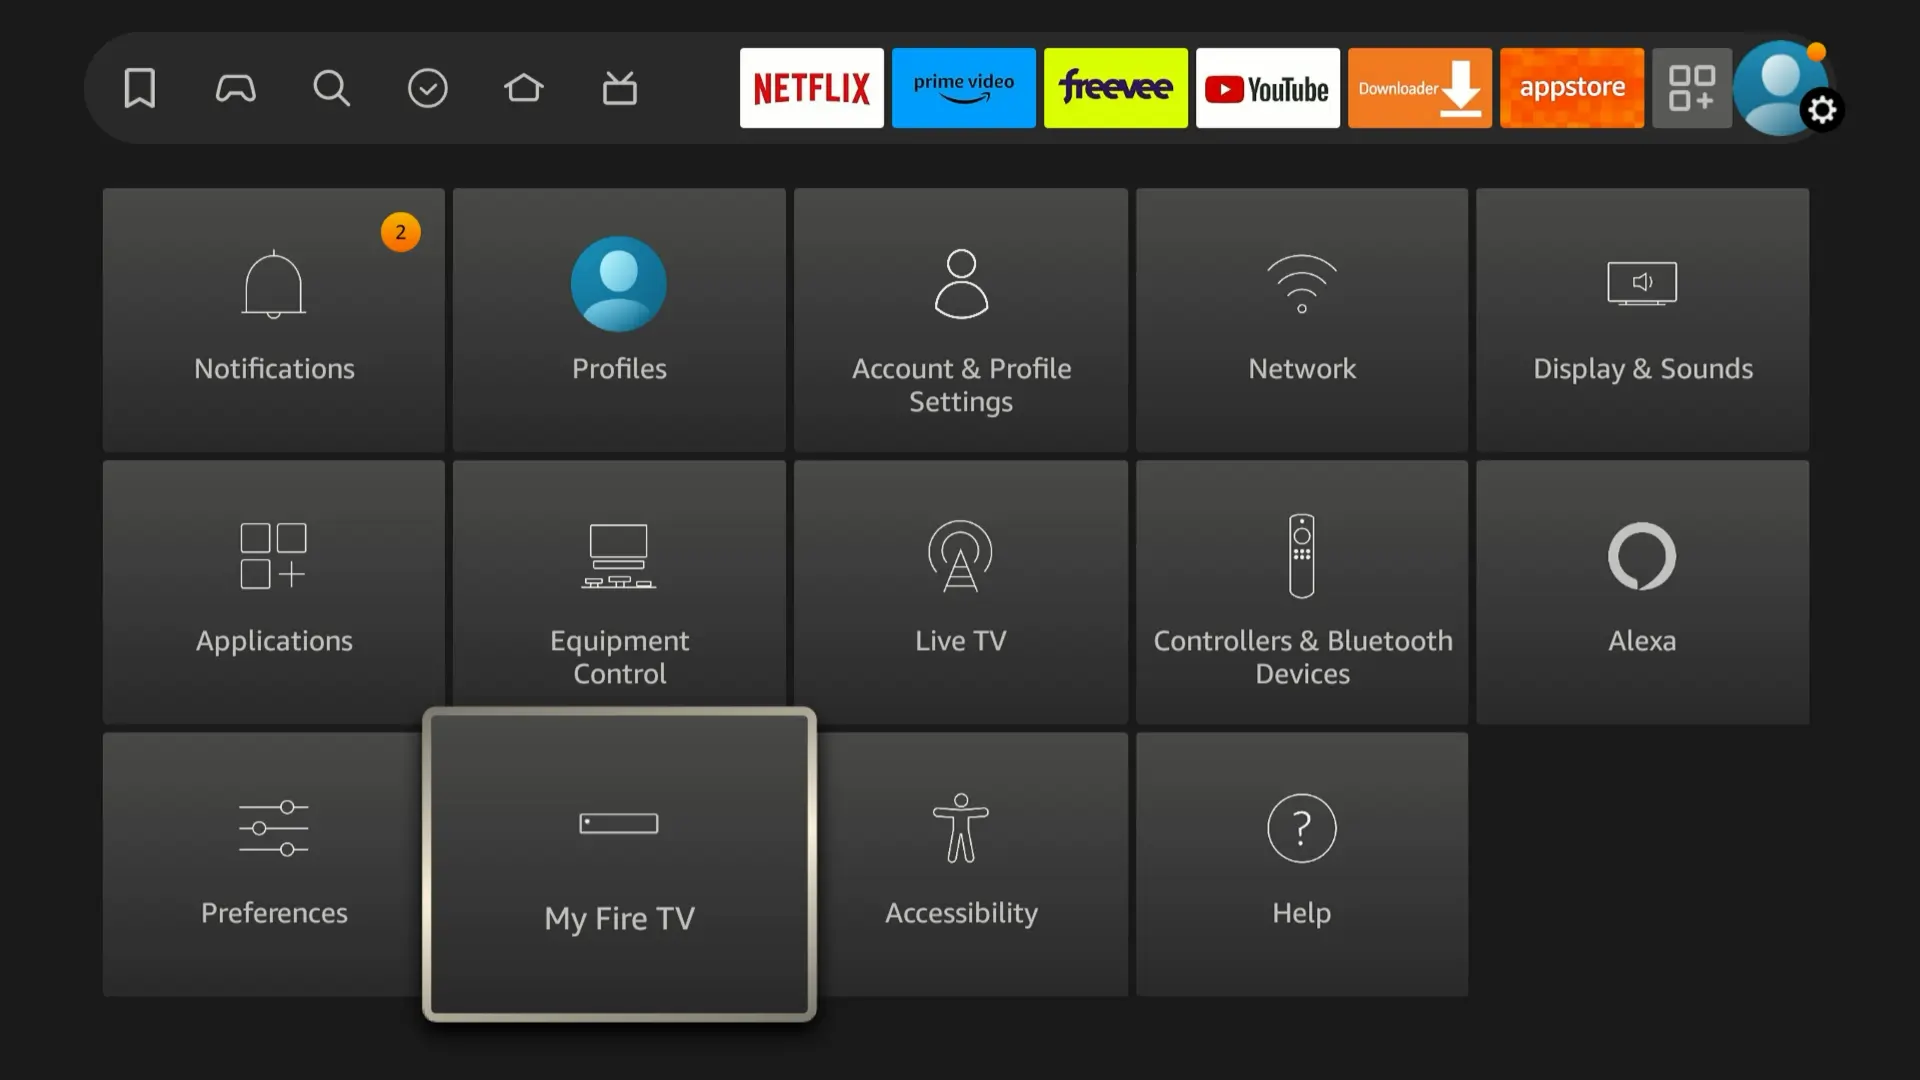 Installing a VPN on Fire TV Stick with .apk file #1